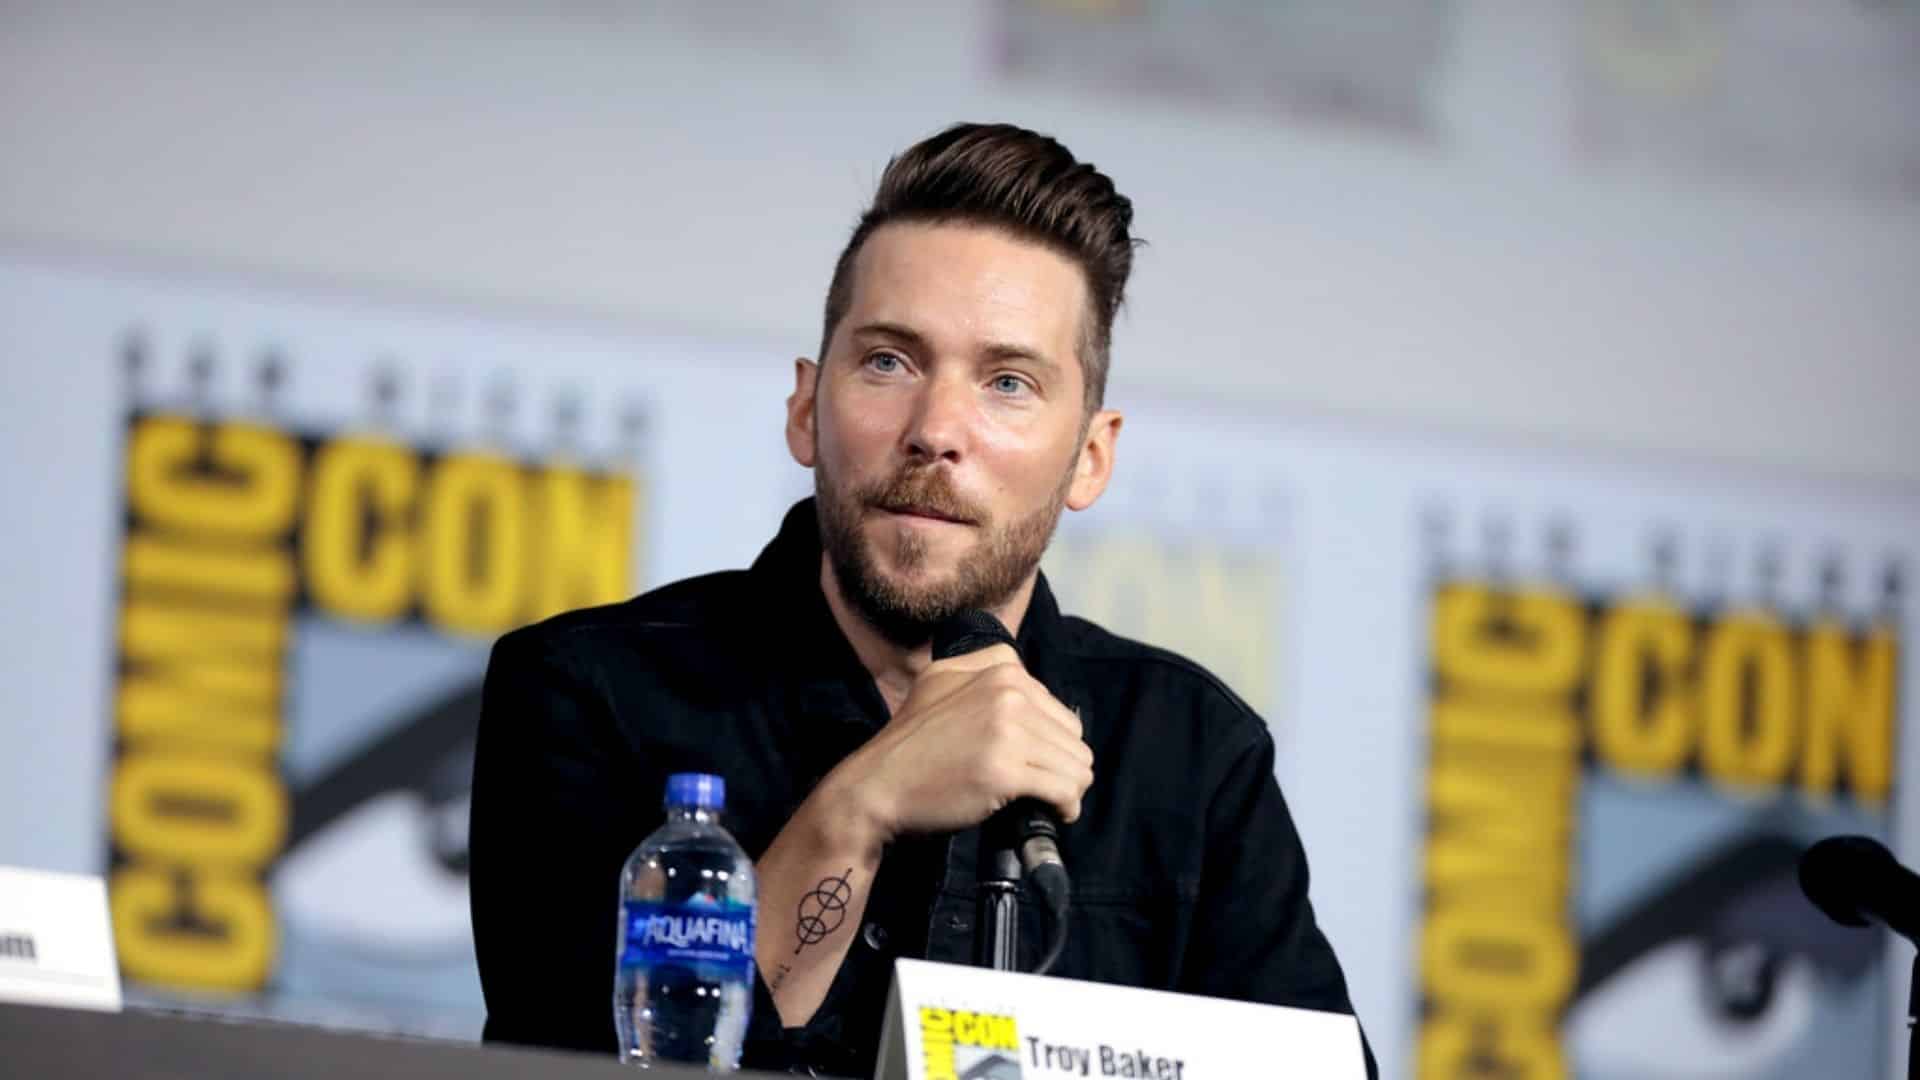 troy baker at comic-con